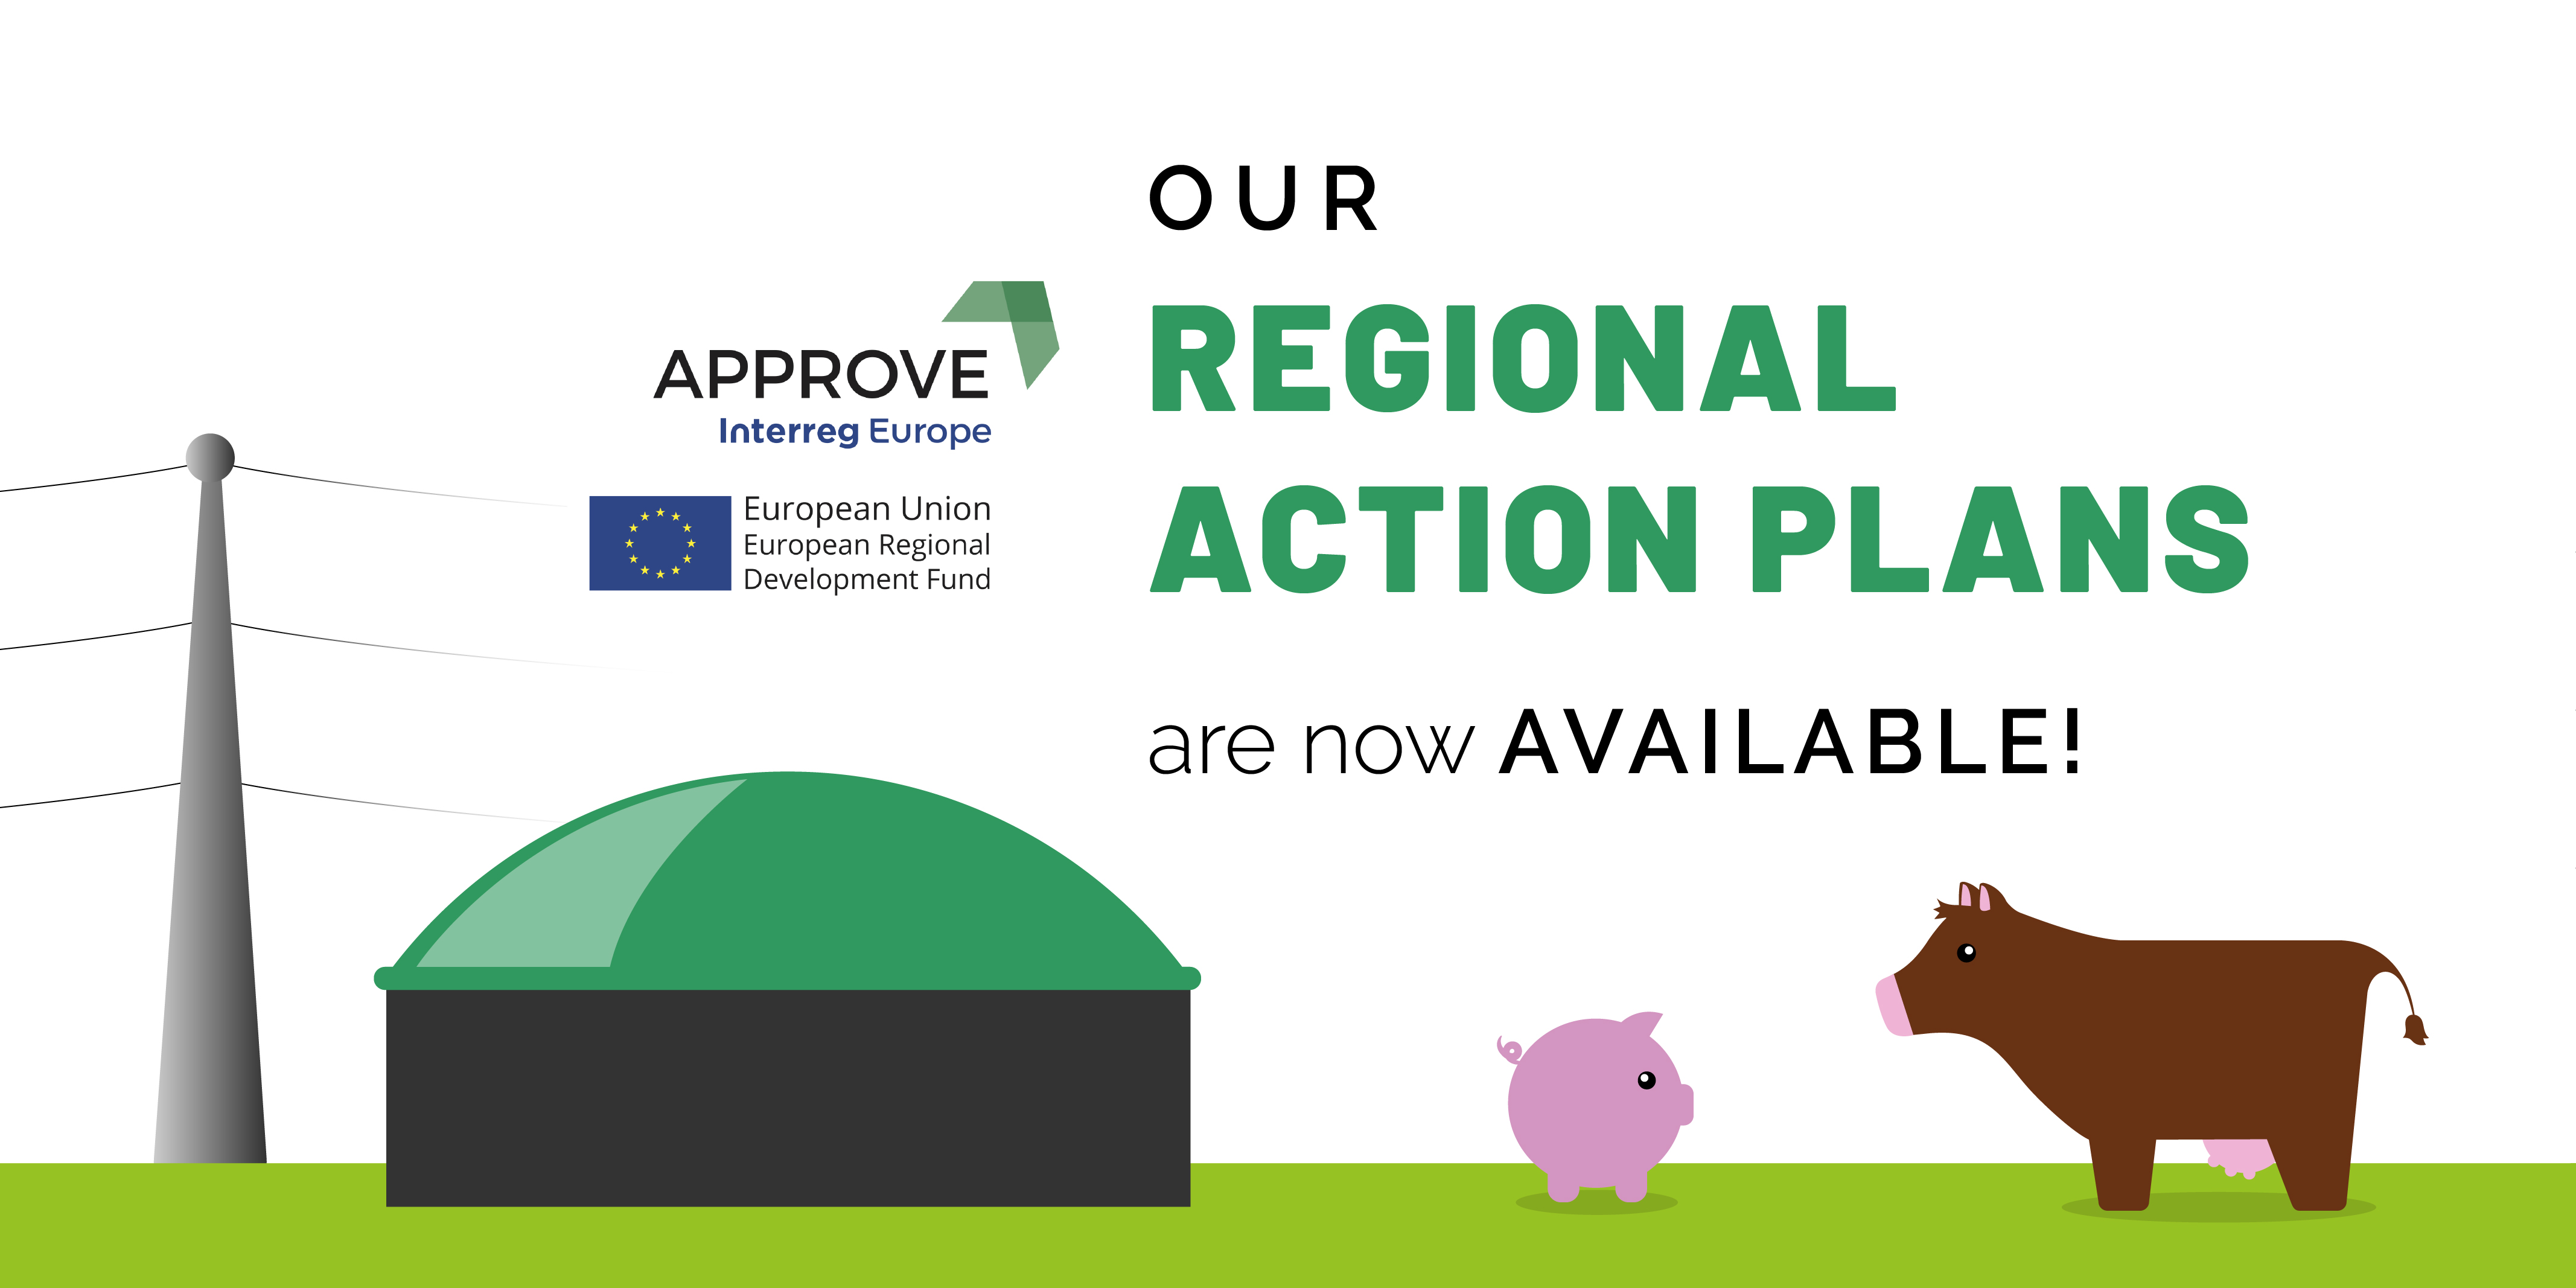 APPROVE Regional Action Plans now available